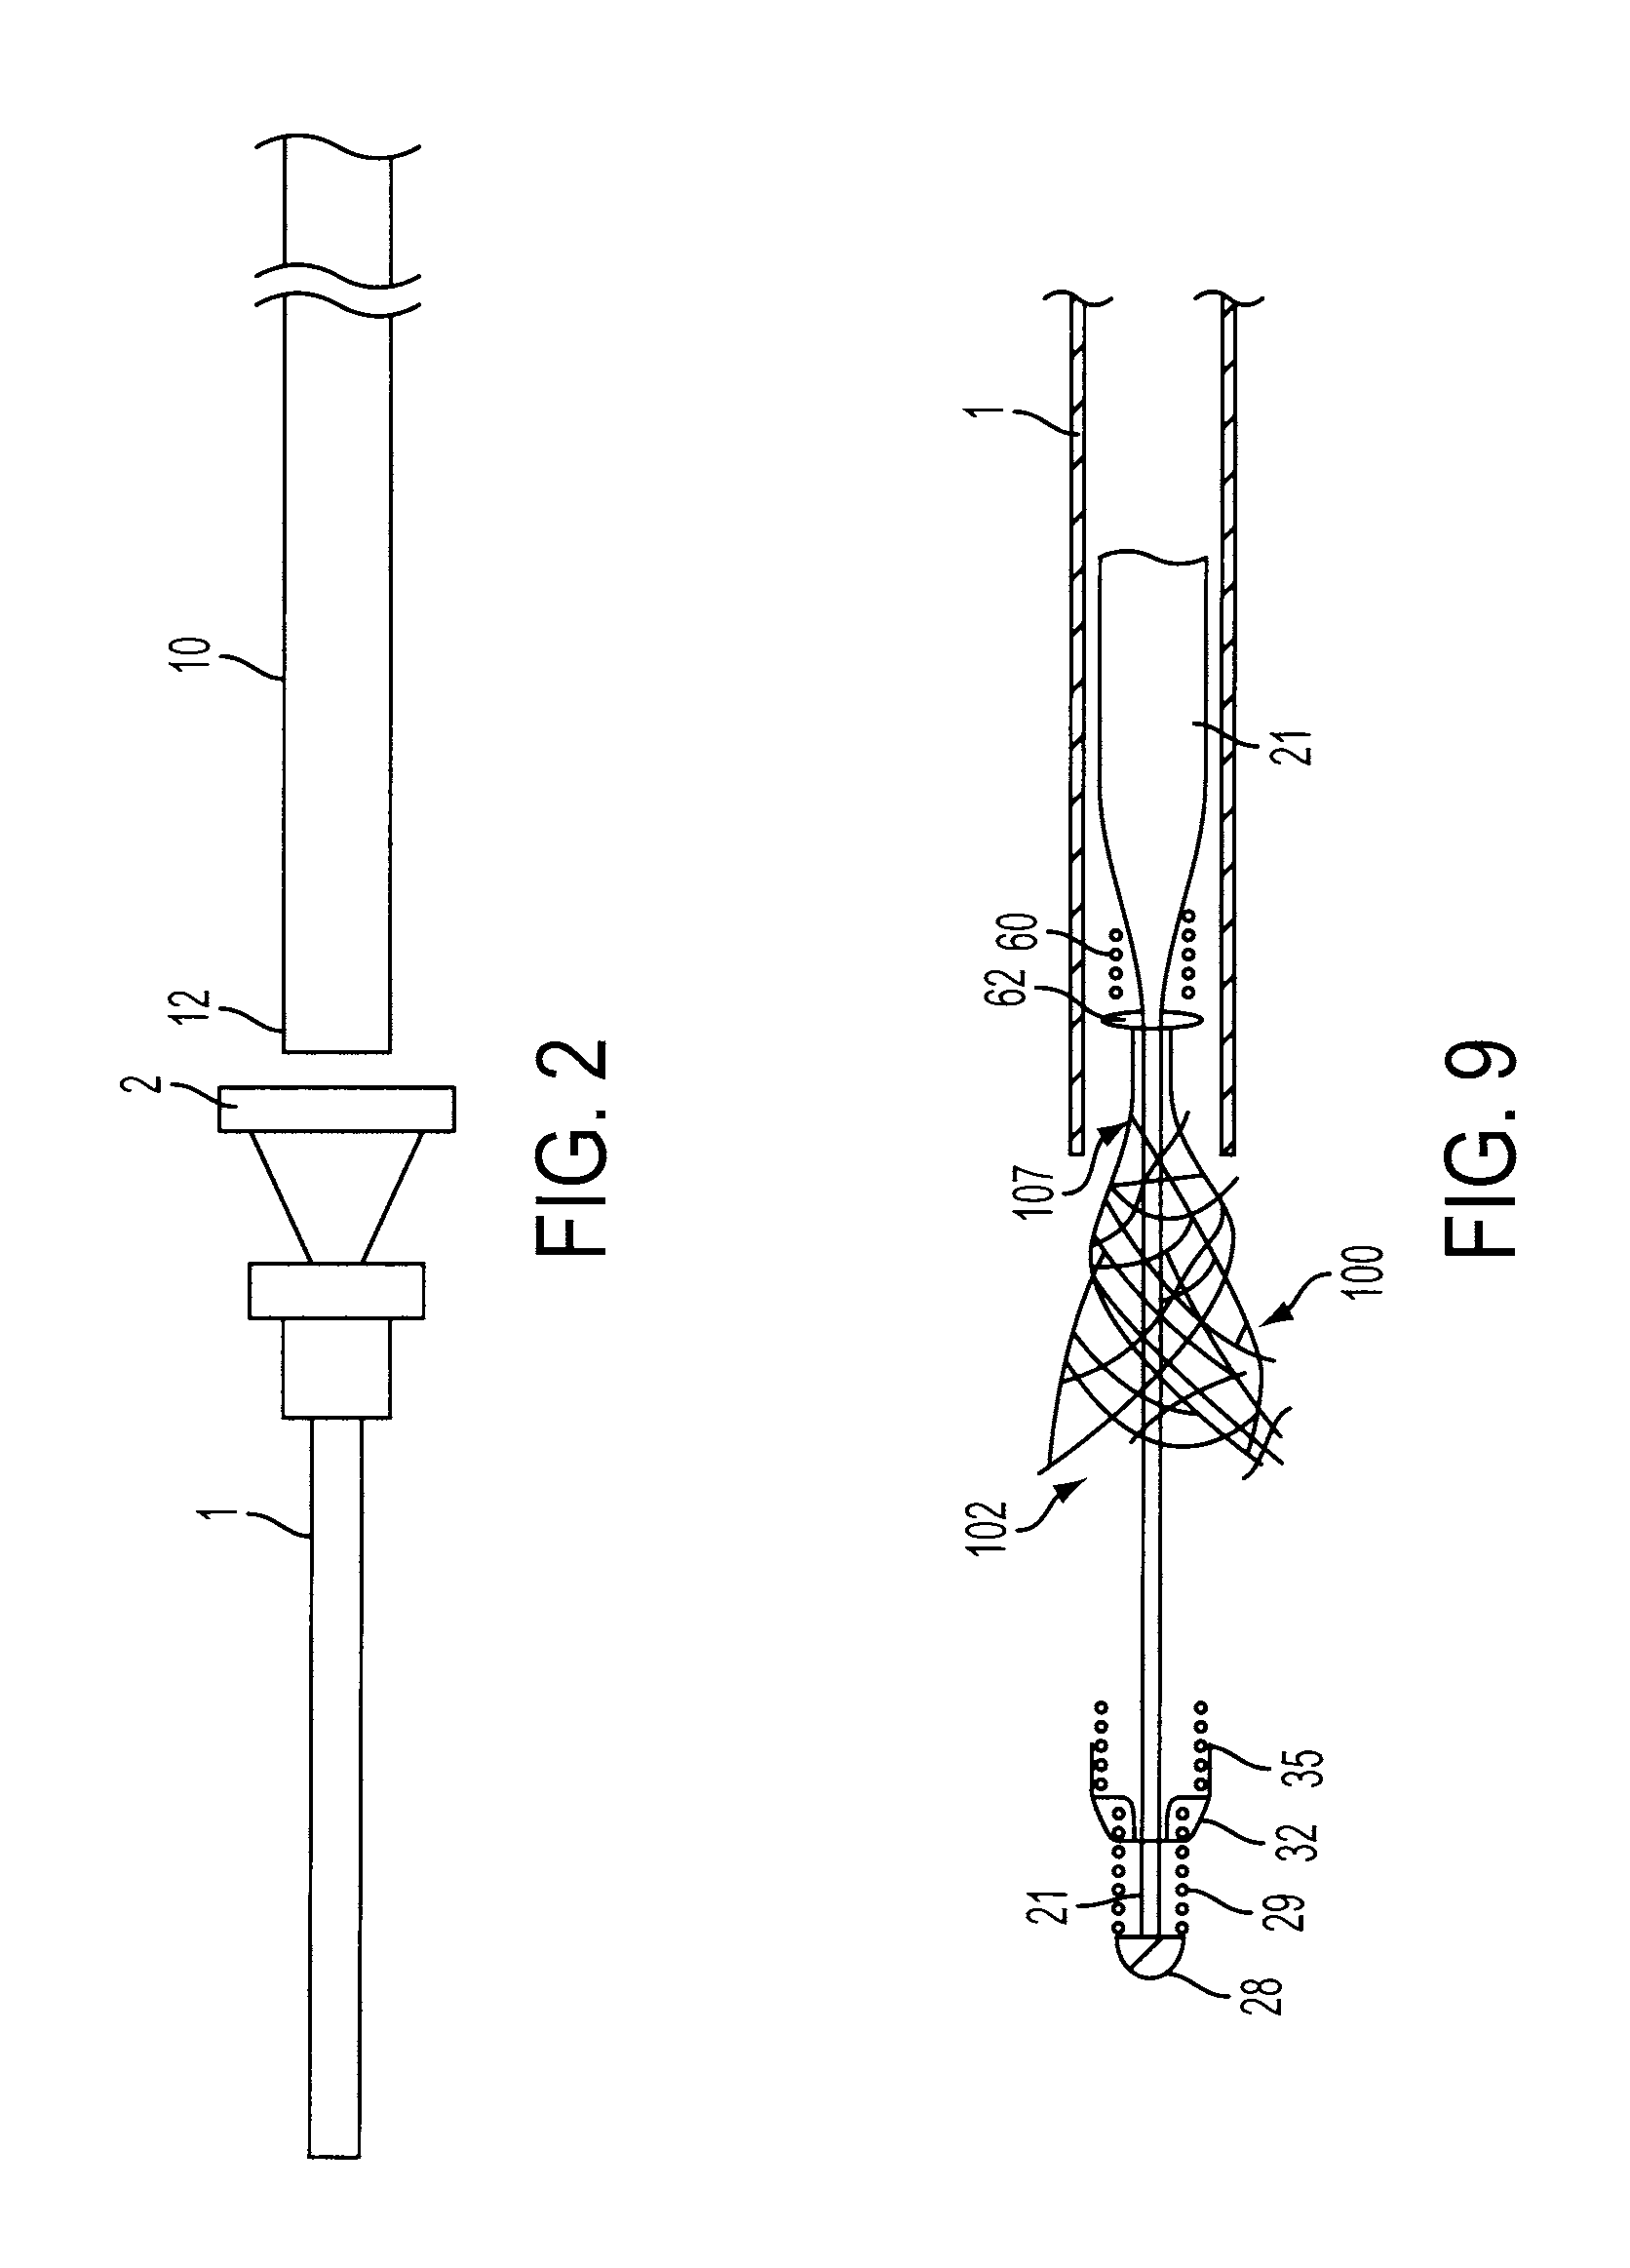 System and method for delivering and deploying an occluding device within a vessel